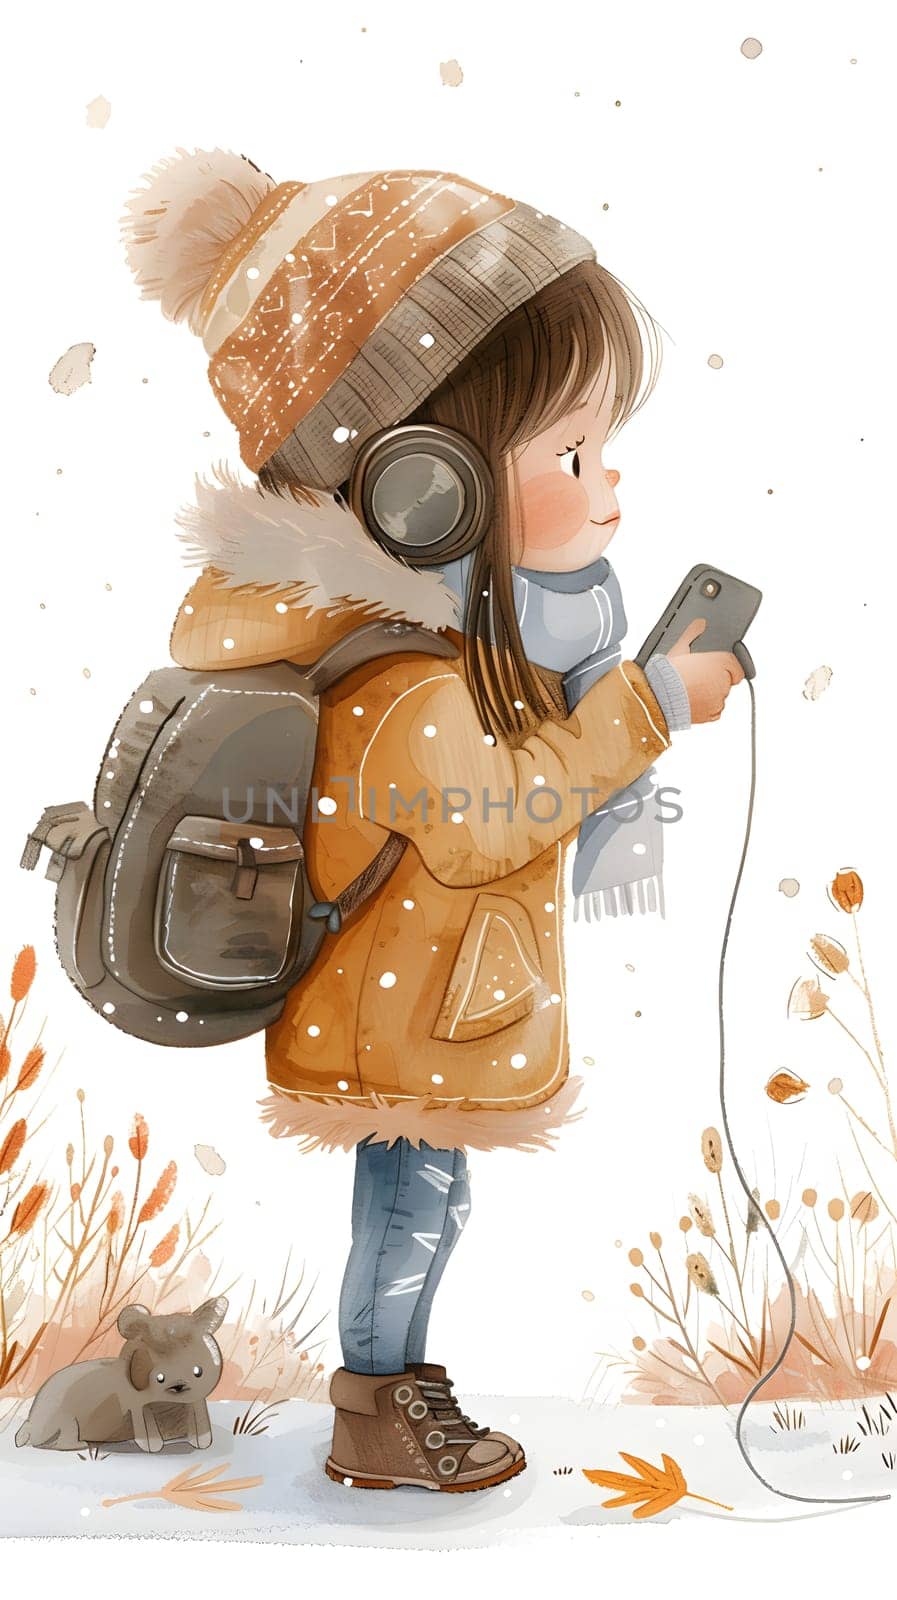 A young girl with a helmet and furlined sleeve is having fun in the snow, holding a cell phone while wearing headphones and a backpack as she enjoys the freezing precipitation